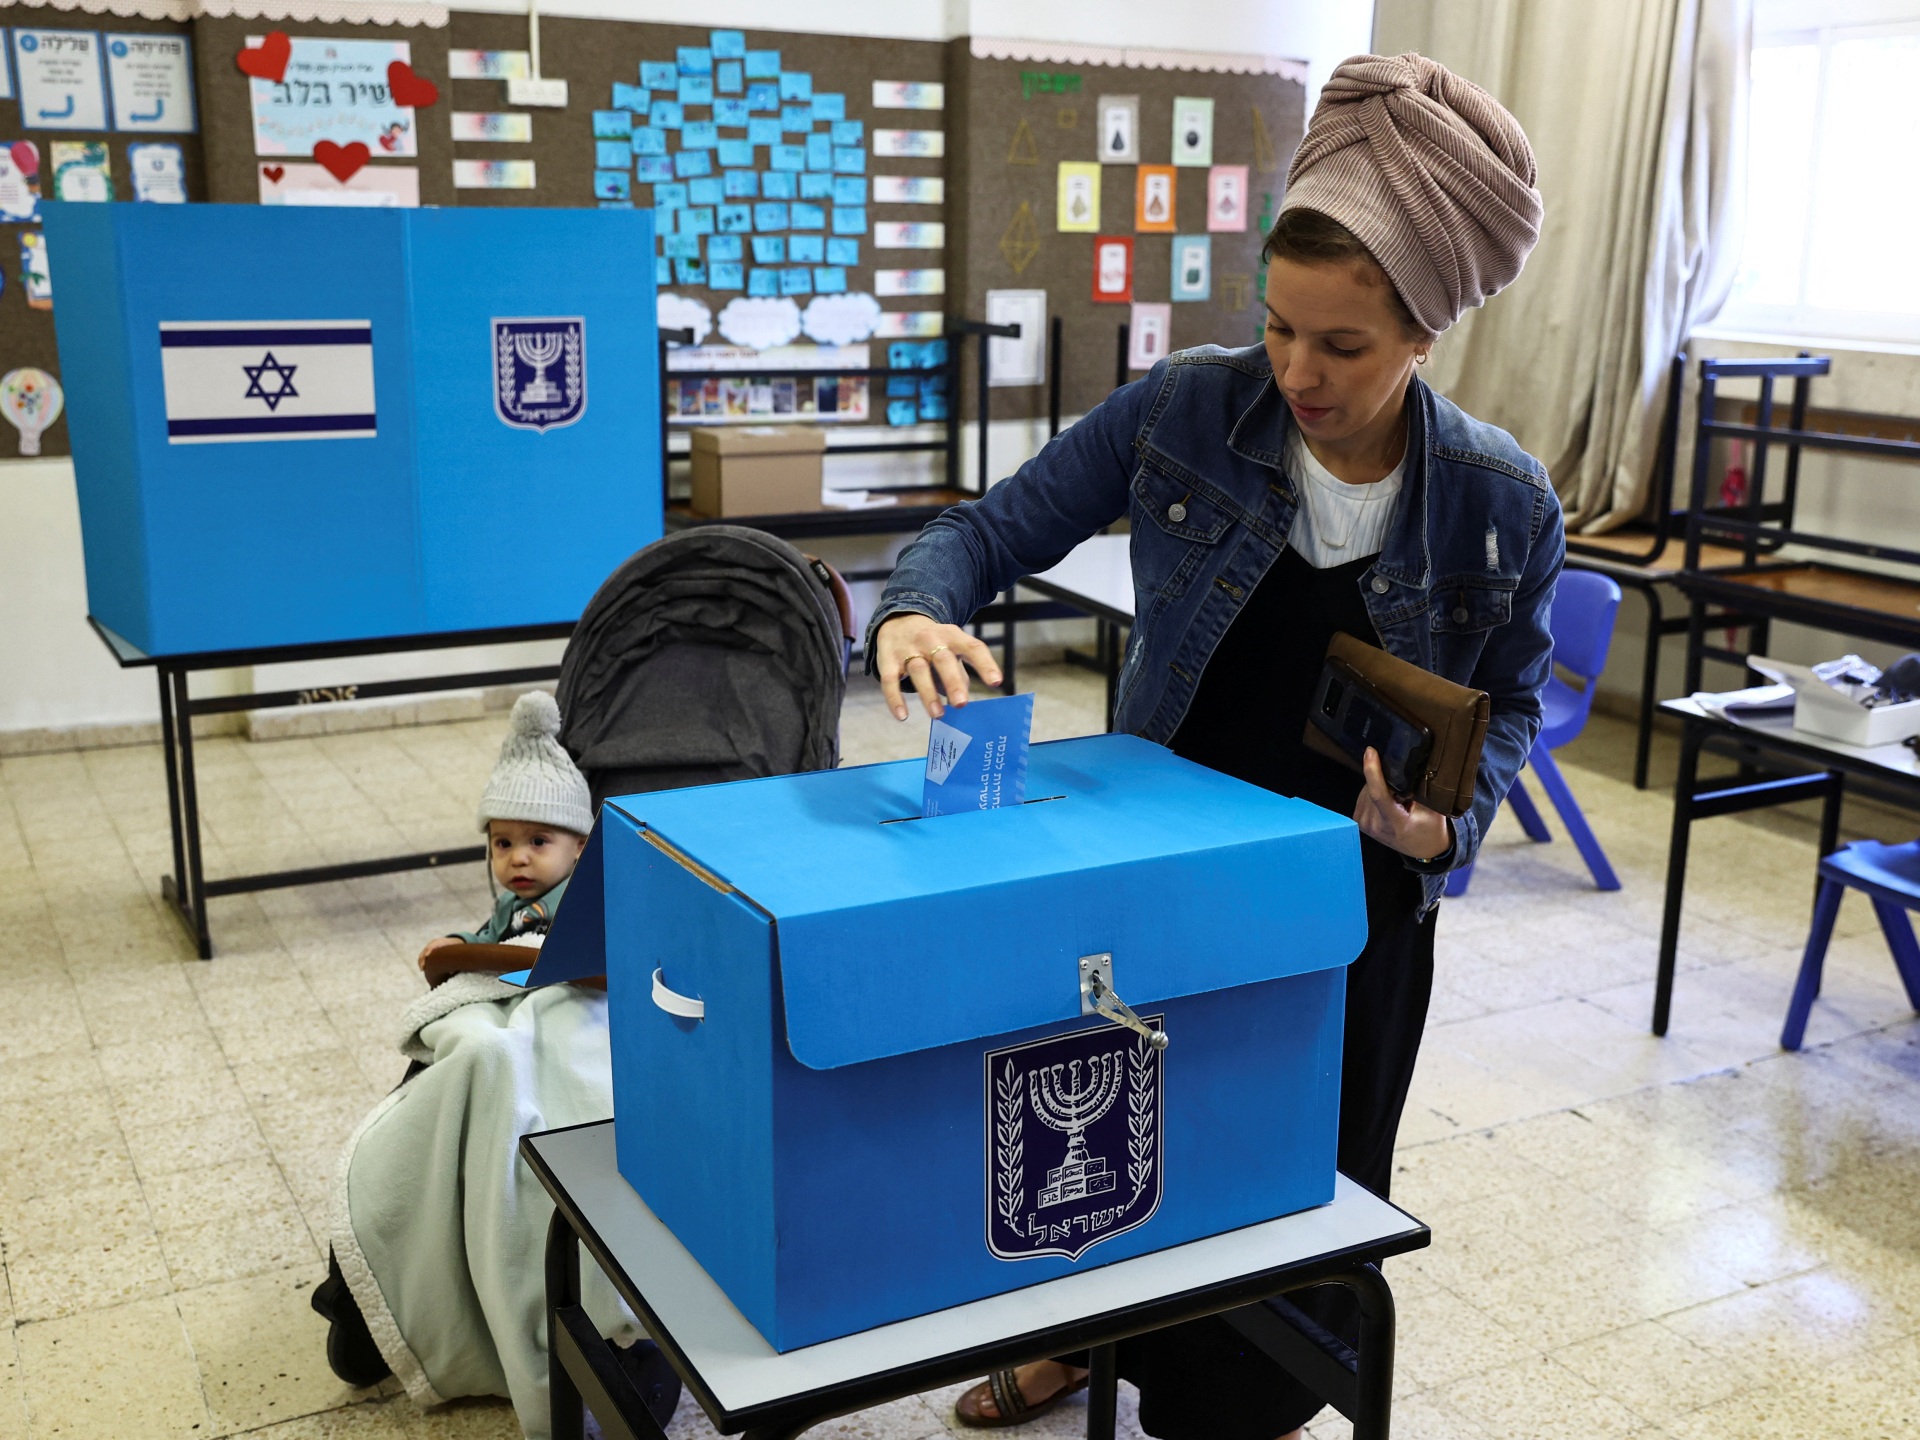 Israelis vote for parliament again, but strong coalition unlikely